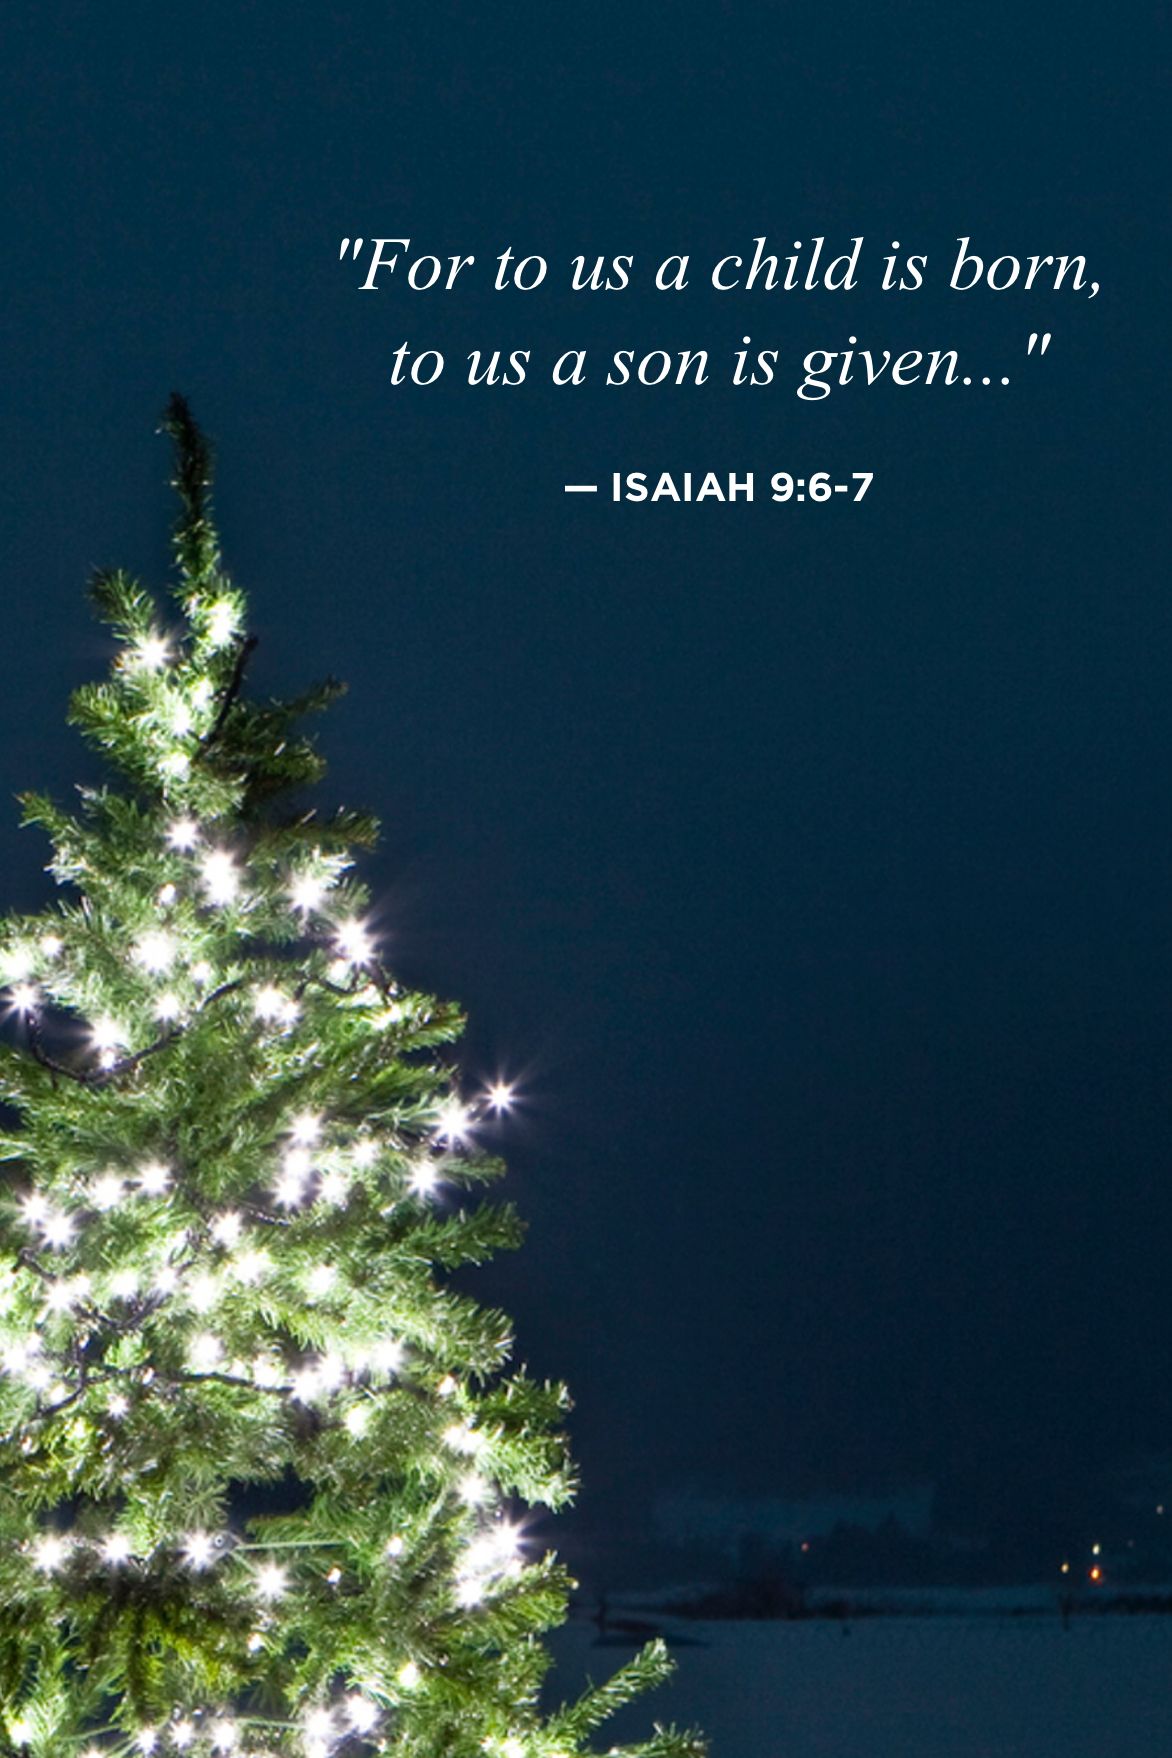 40 Religious Christmas Quotes - Short Religious Christmas Quotes and Sayings